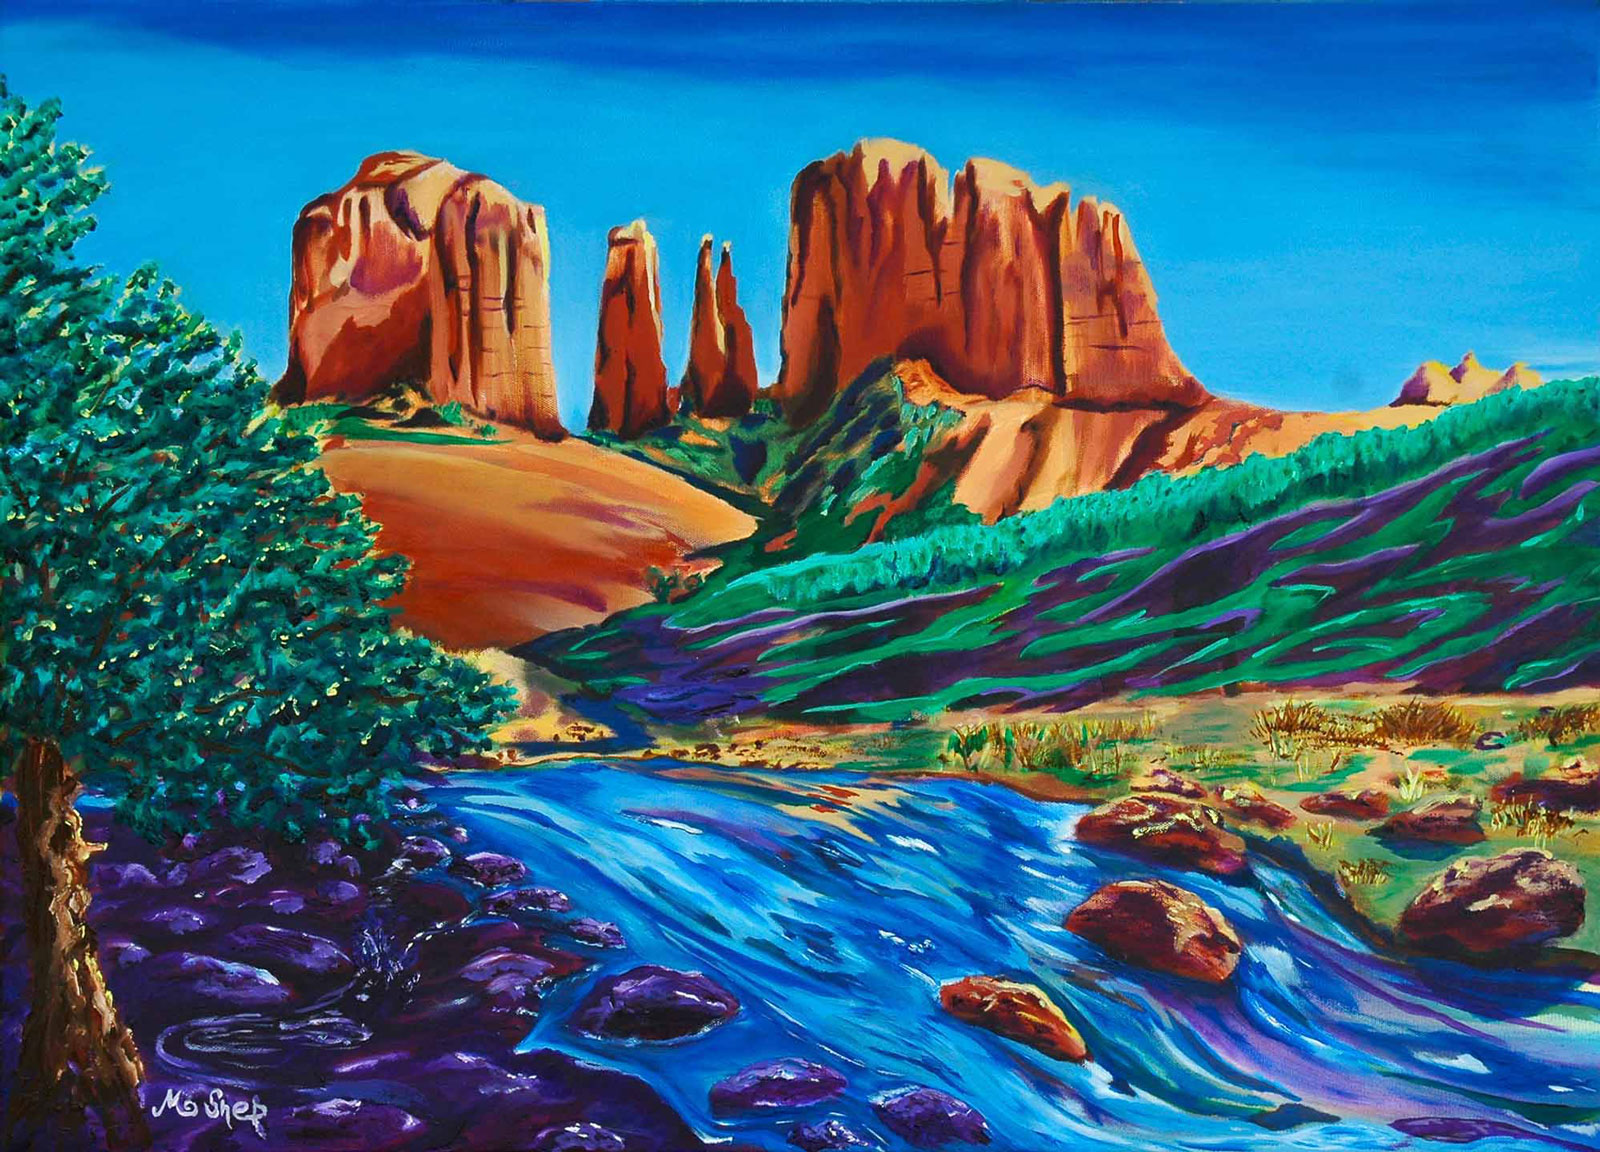 Cathedral Rock by McShep